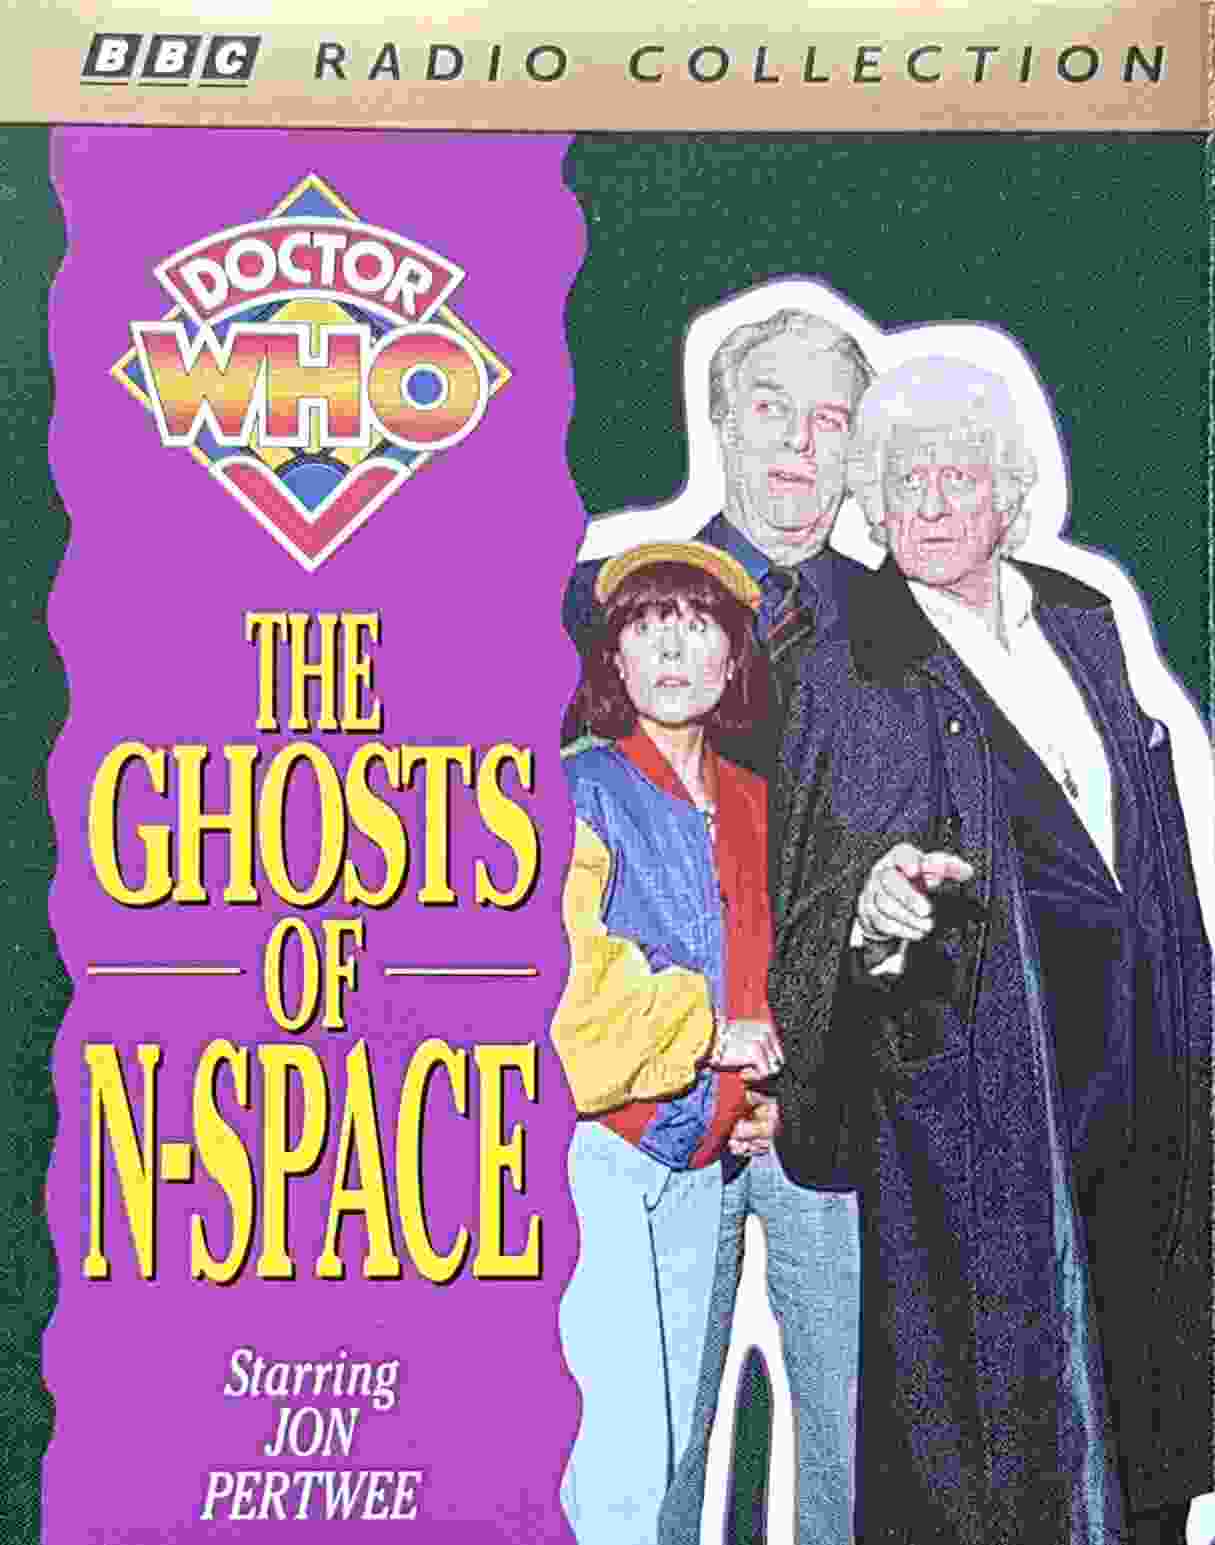 Picture of Doctor Who - The ghosts of 'n' space by artist Barry Letts from the BBC cassettes - Records and Tapes library